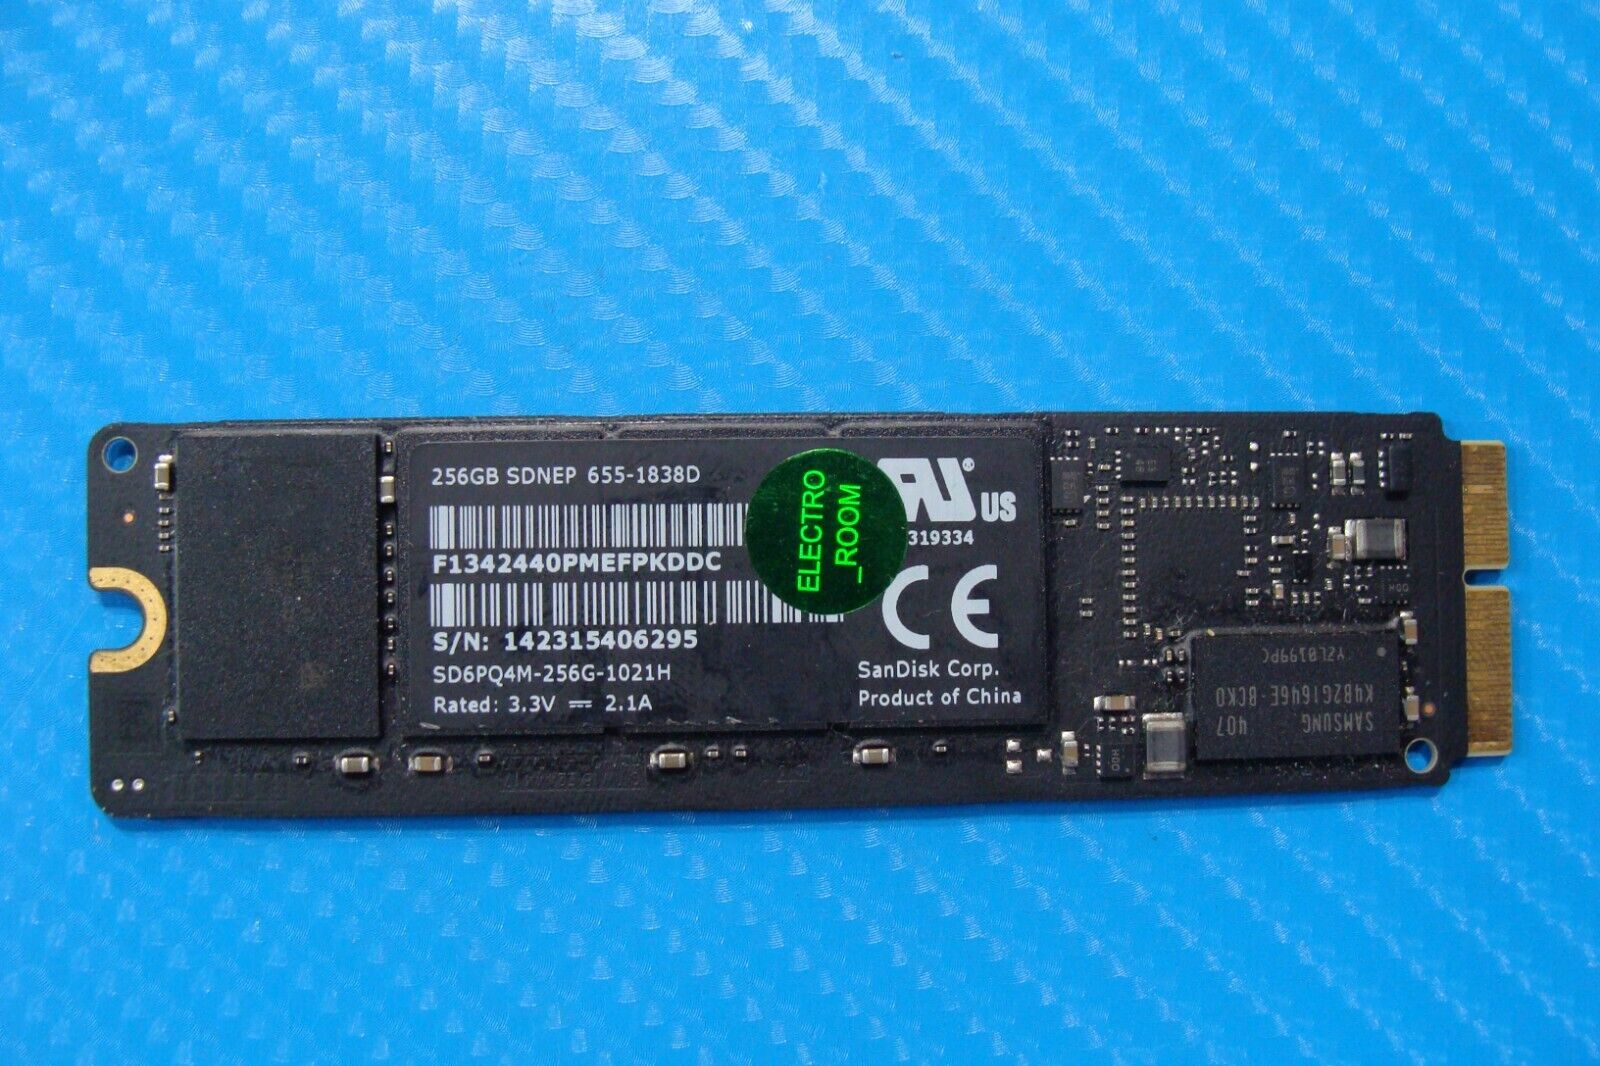 MacBook A1502 SanDisk 256GB SSD Solid State Drive SD6PQ4M-256G-1021H 655-1838D